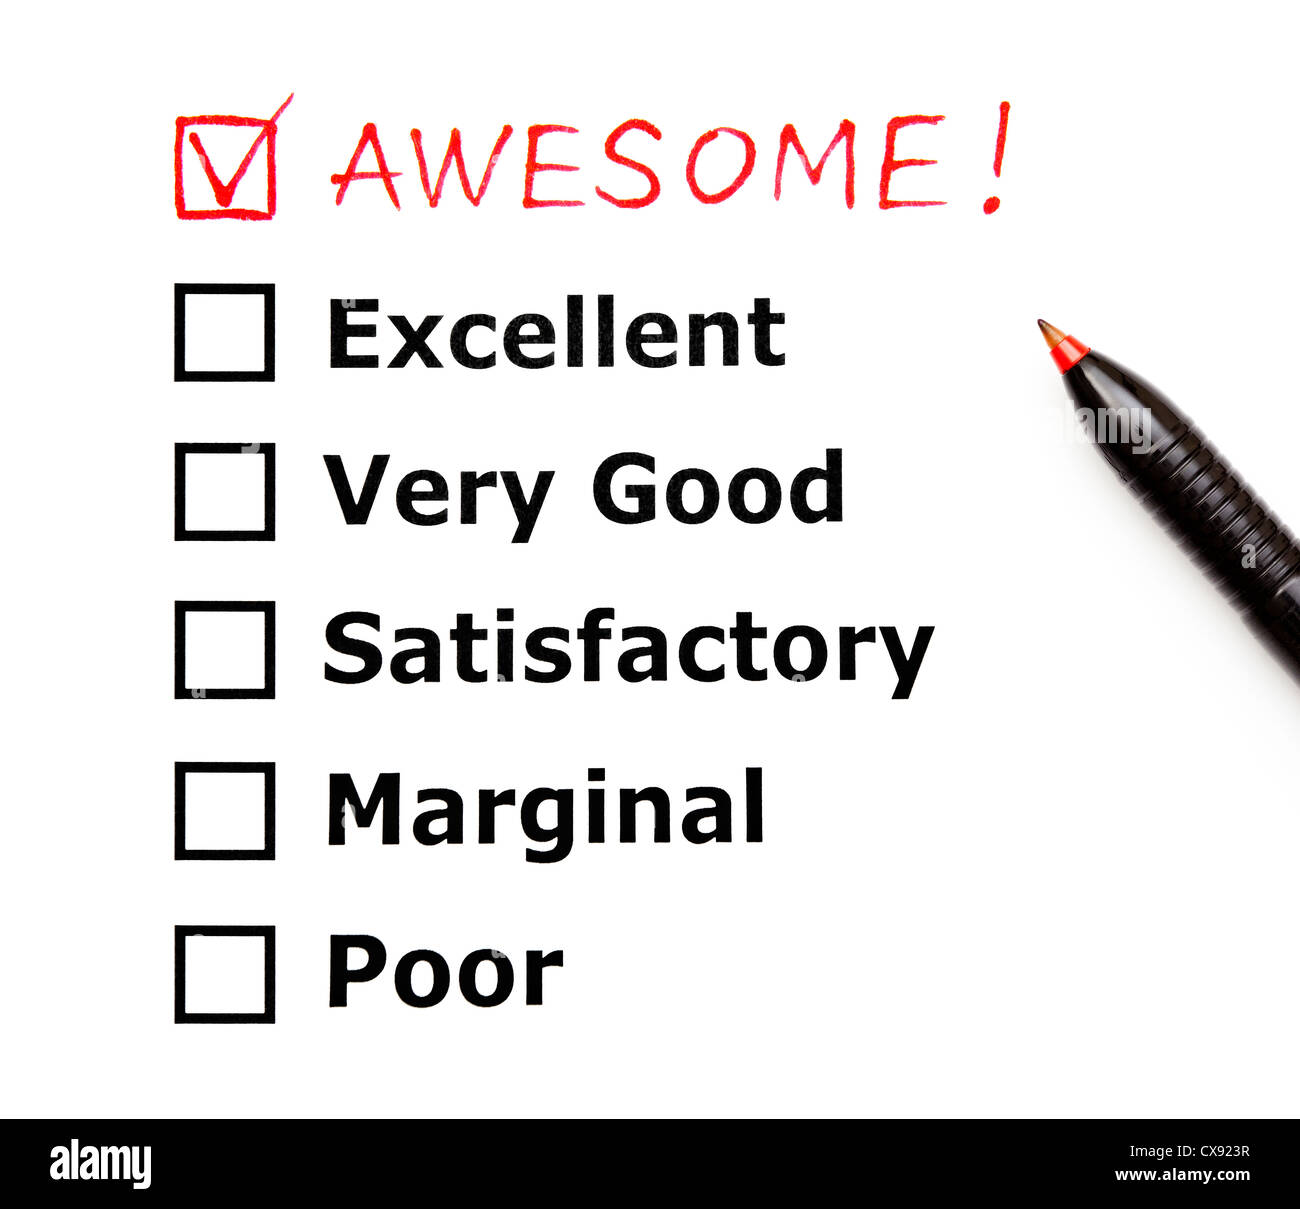 Awesome added on top of an customer evaluation form with red pen Stock Photo